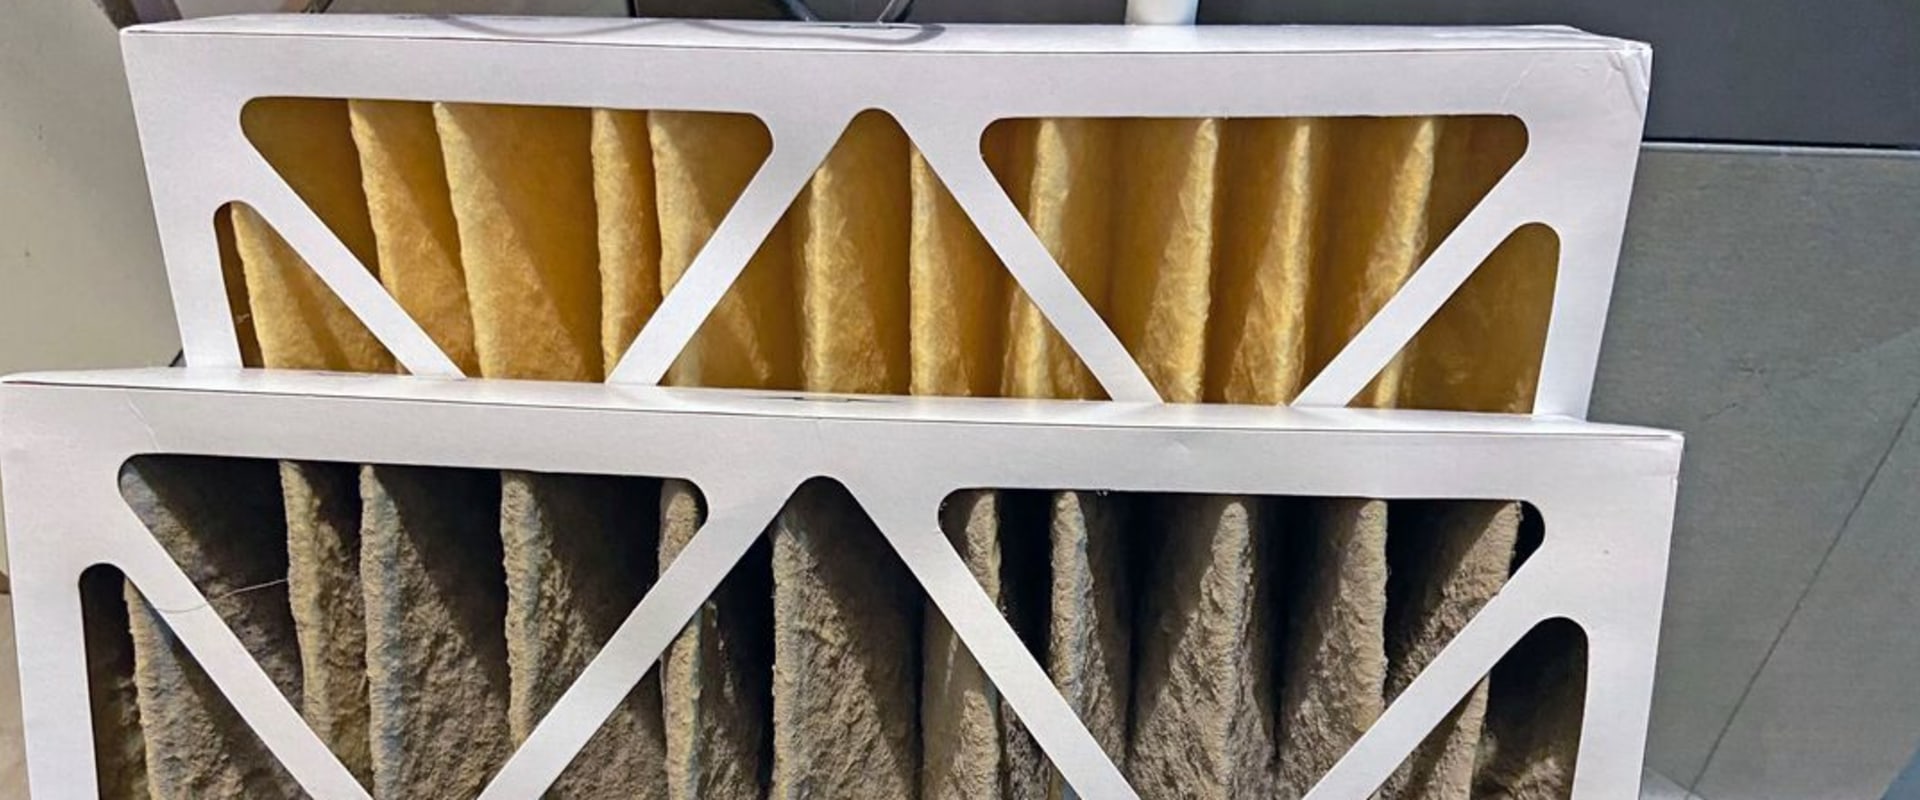 When Should You Change Your Furnace Filter? A Comprehensive Guide